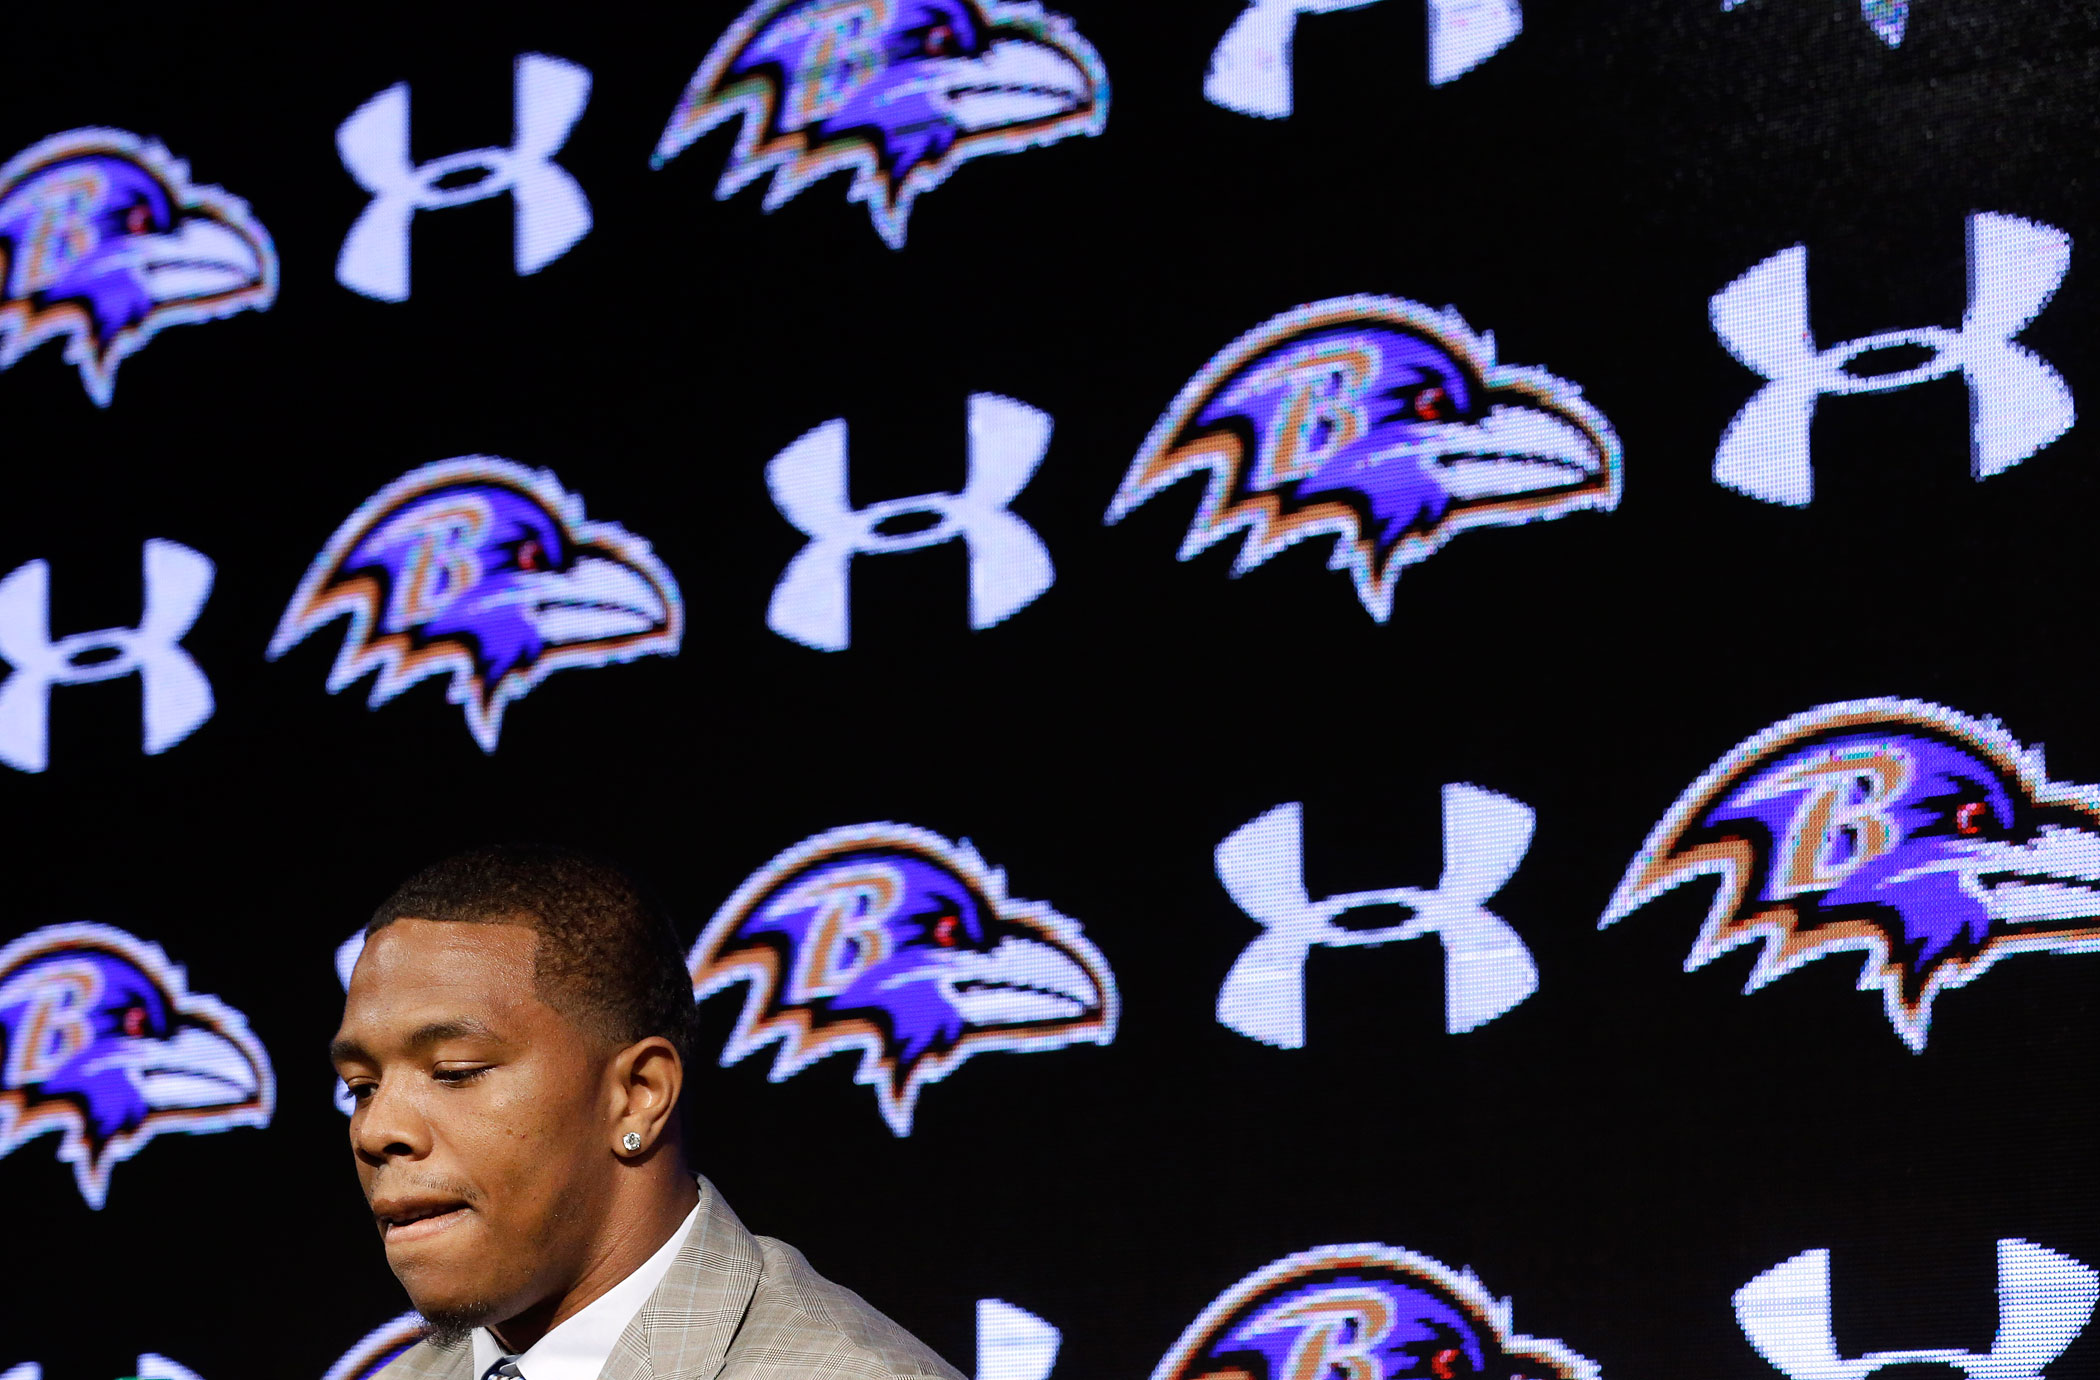 Baltimore Ravens running back Ray Rice pauses as he speaks during an NFL football news conference, Friday, May 23, 2014, in Owings Mills, Md. (Patrick Semansky—AP)